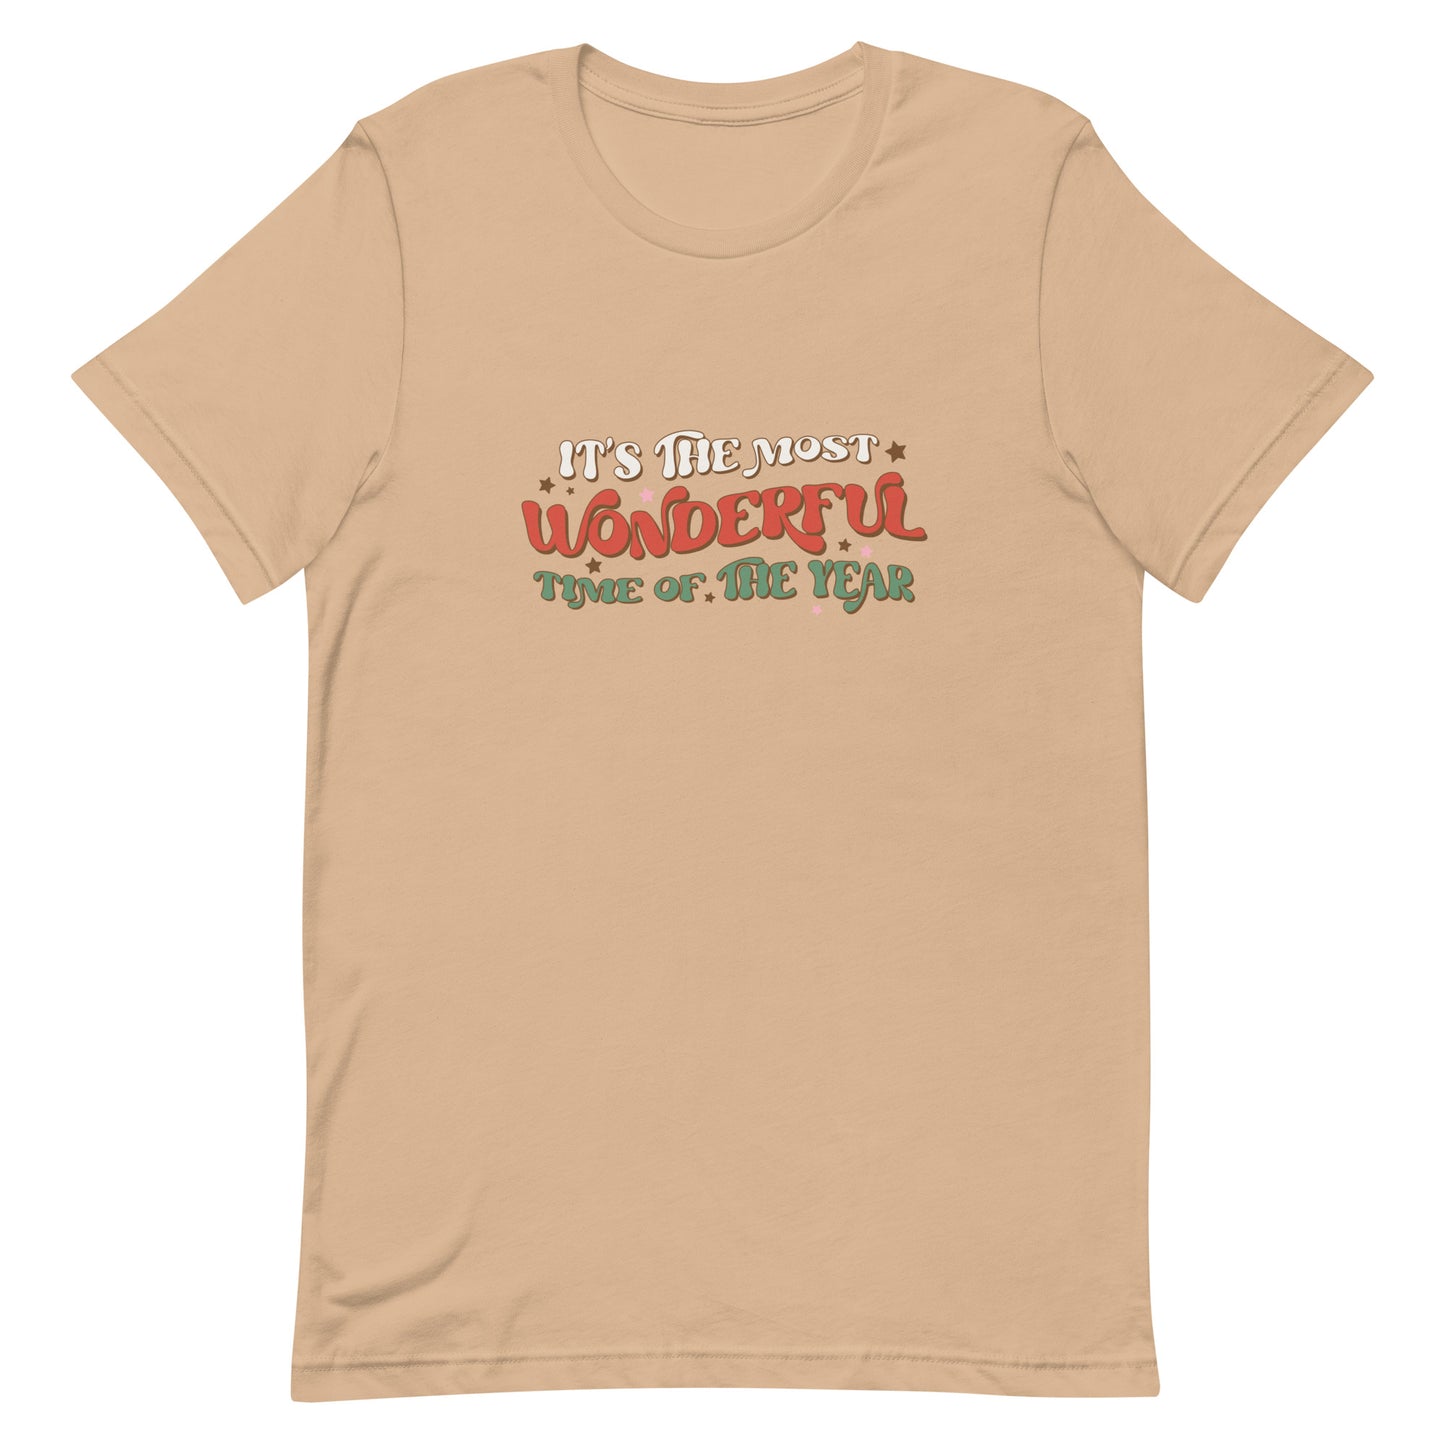 It's the Most Wonderful Time of the Year Unisex t-shirt